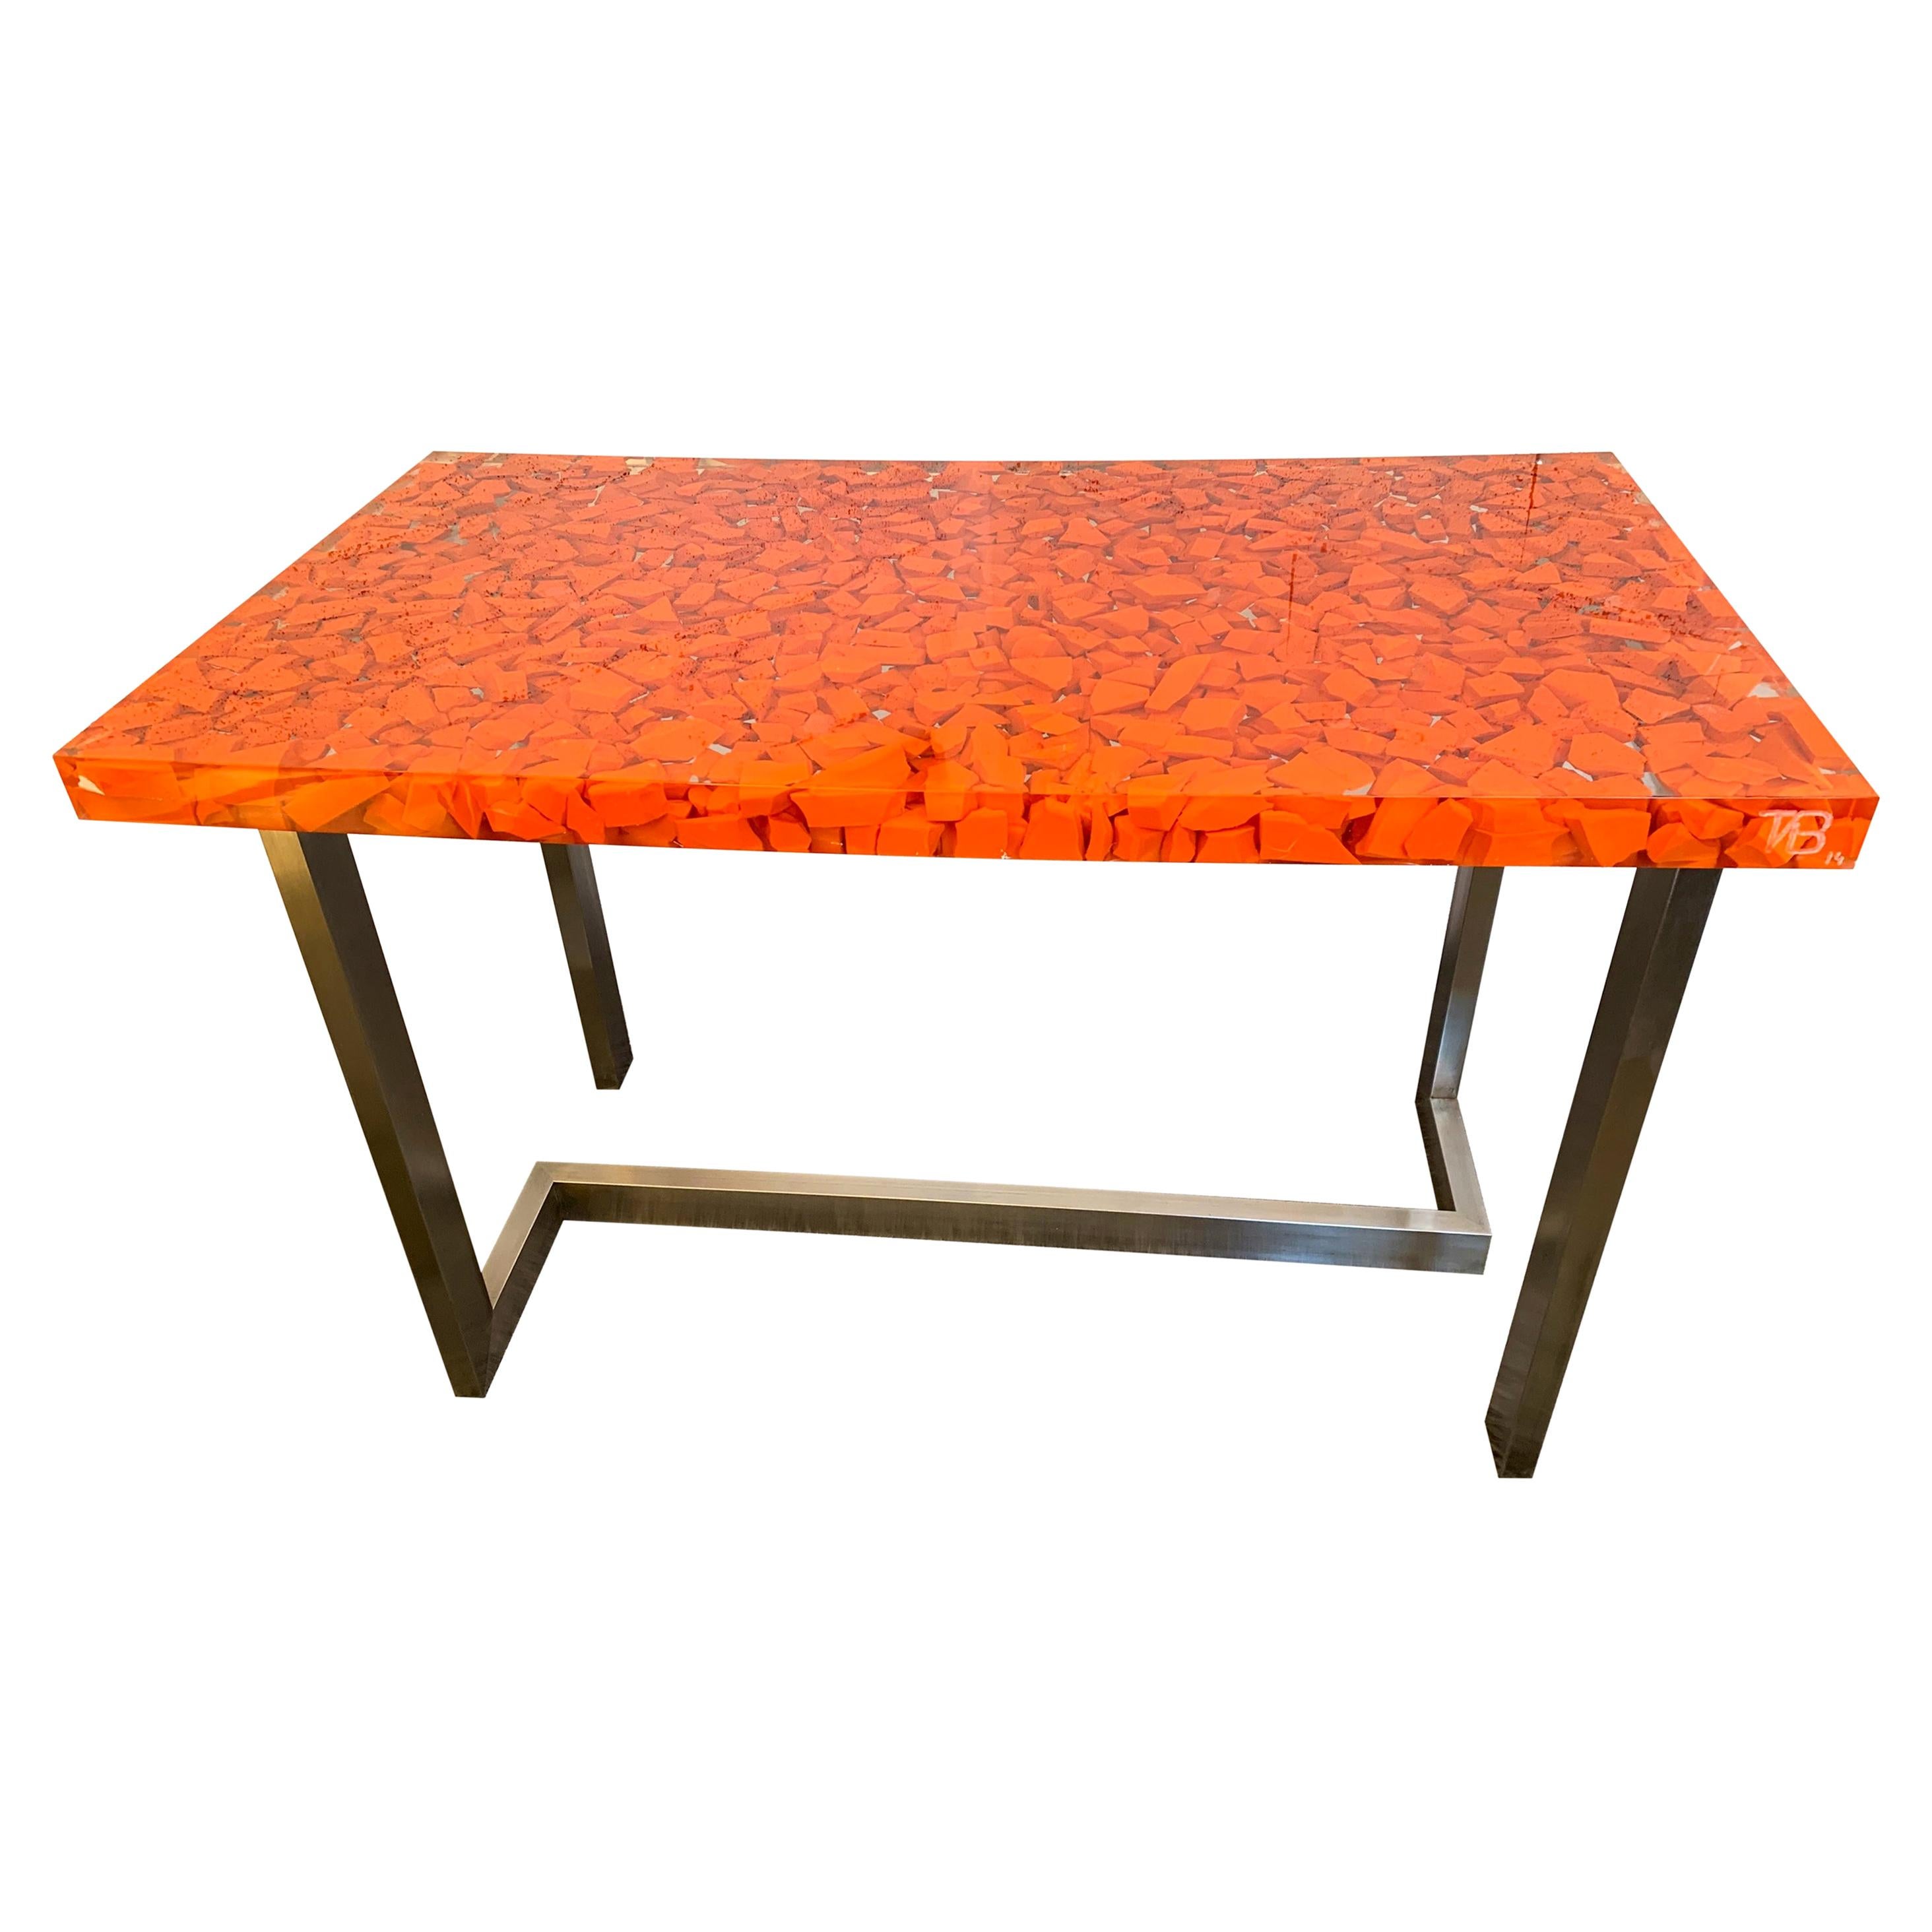 Resin Fractal Inclusion Console Table Desk by Thomas Brant, France, 2014 For Sale